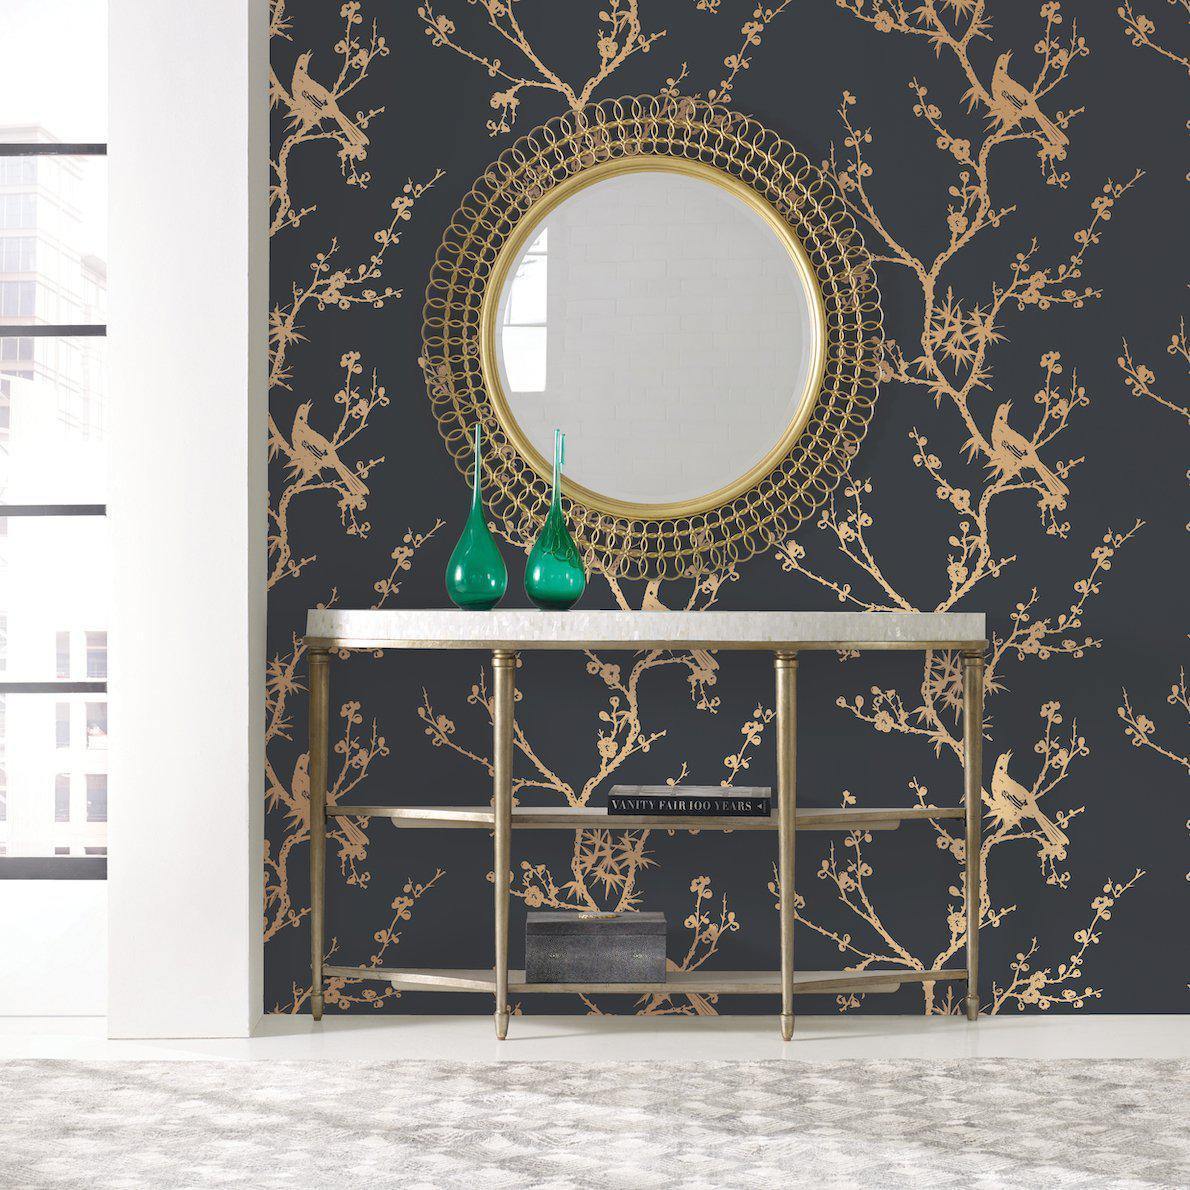 Tempaper Designs LIFESTYLE - Cynthia Rowley Bird Watching Black & Gold Peel and Stick Wallpaper